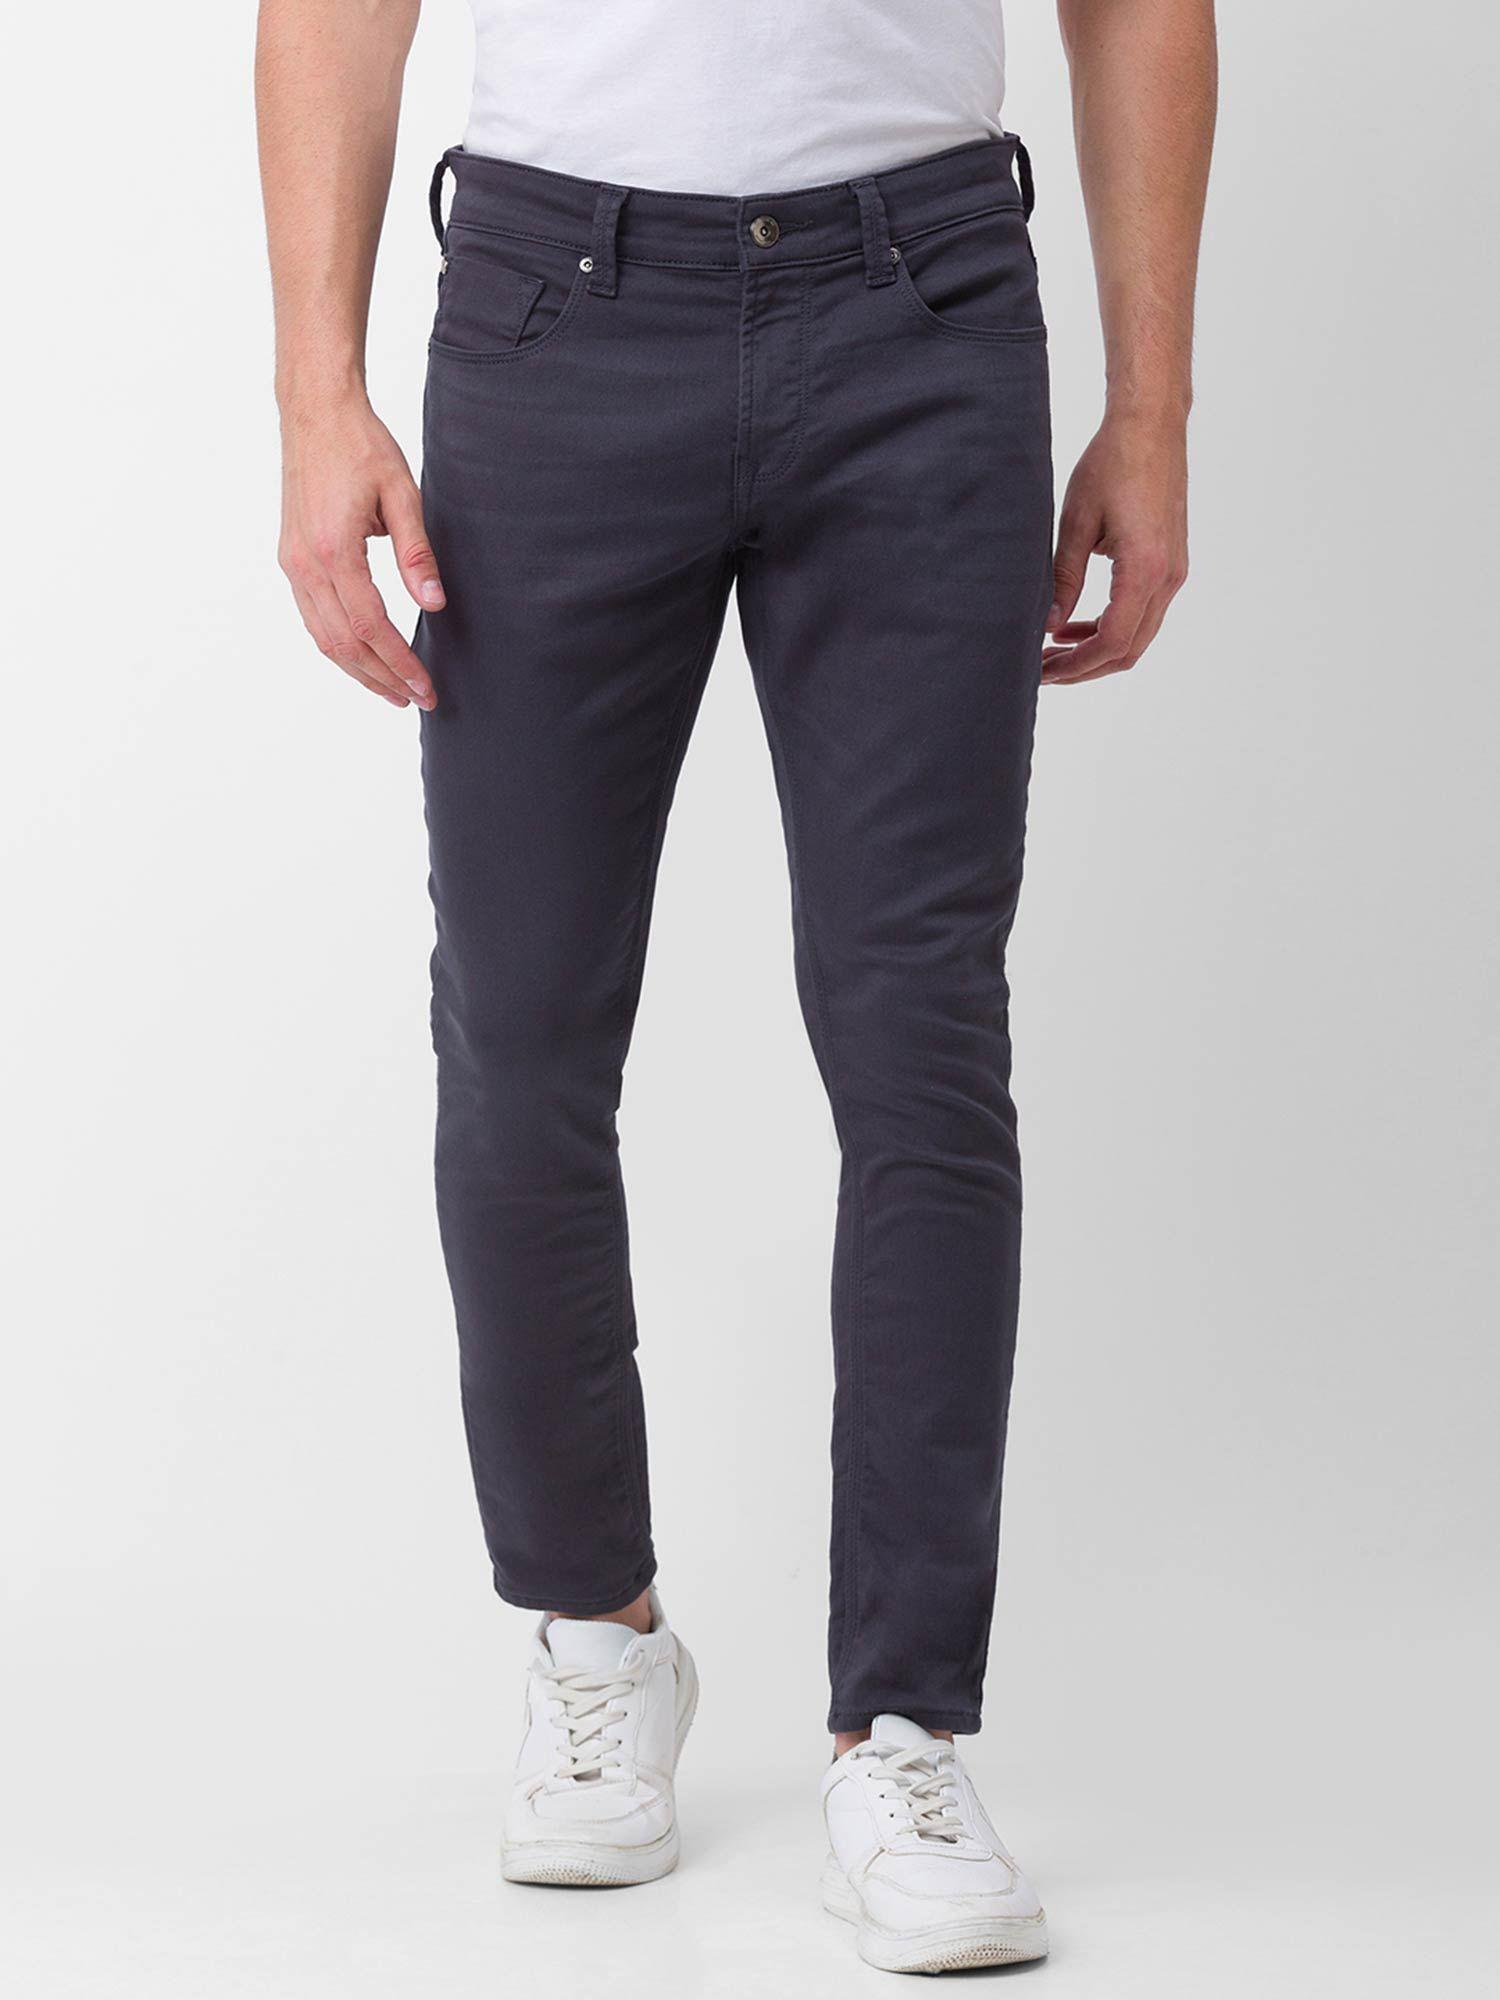 dark-grey-cotton-slim-fit-tapered-length-jeans-for-men-(kano)